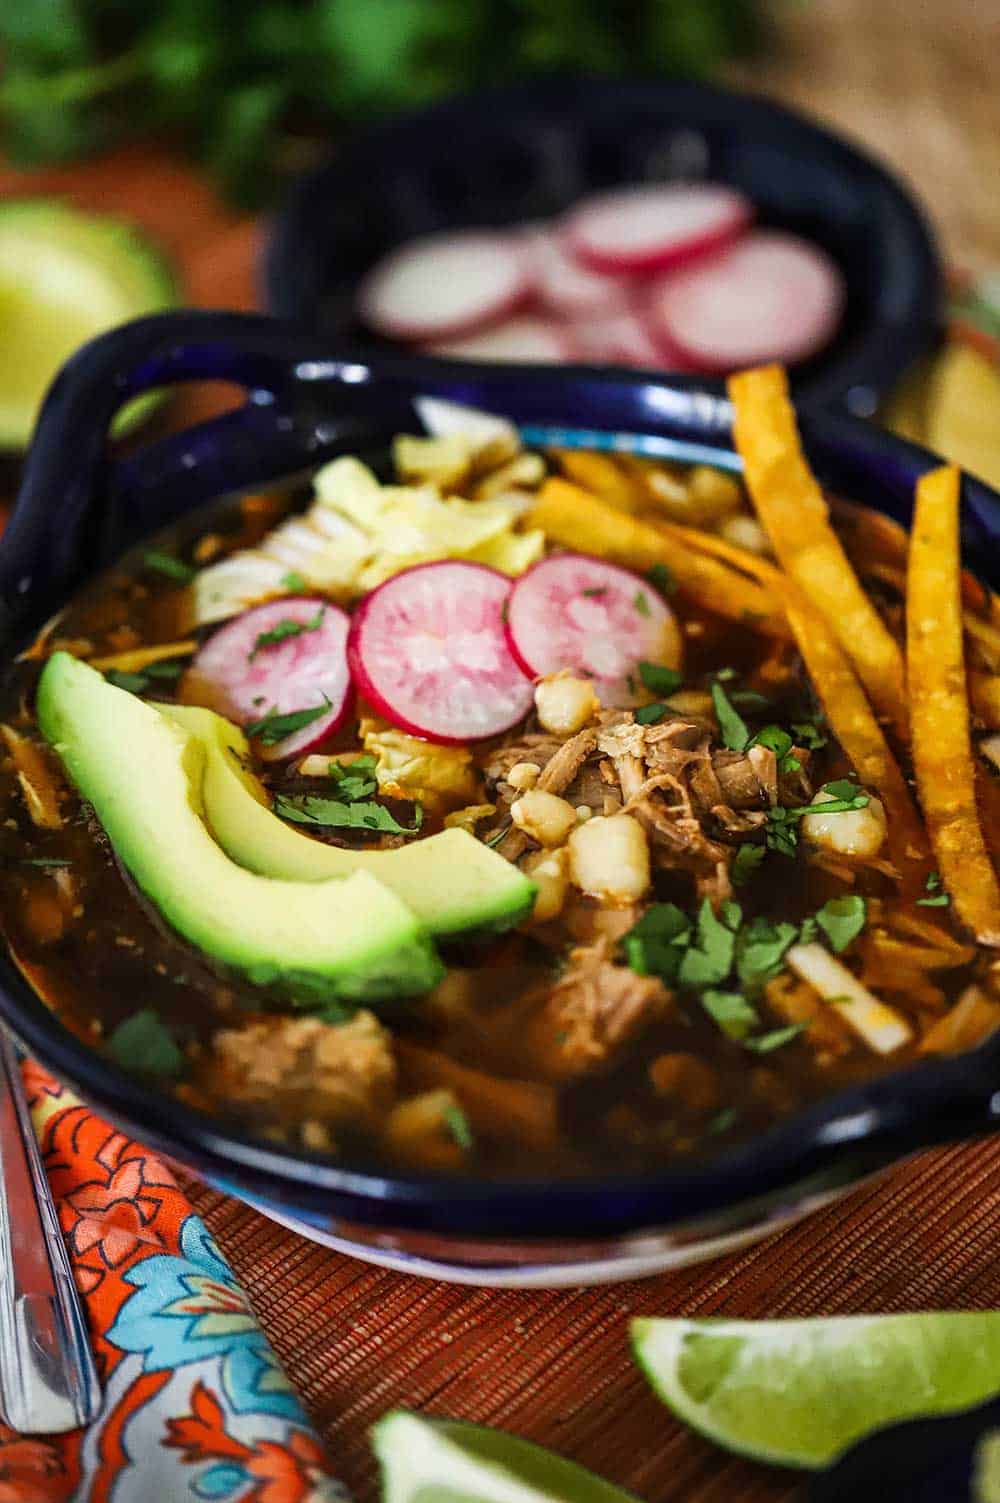 A color Mexican-style bowl filled with pozole and topped with avocado slices, radish slivers, and strips of fried corn tortillas.